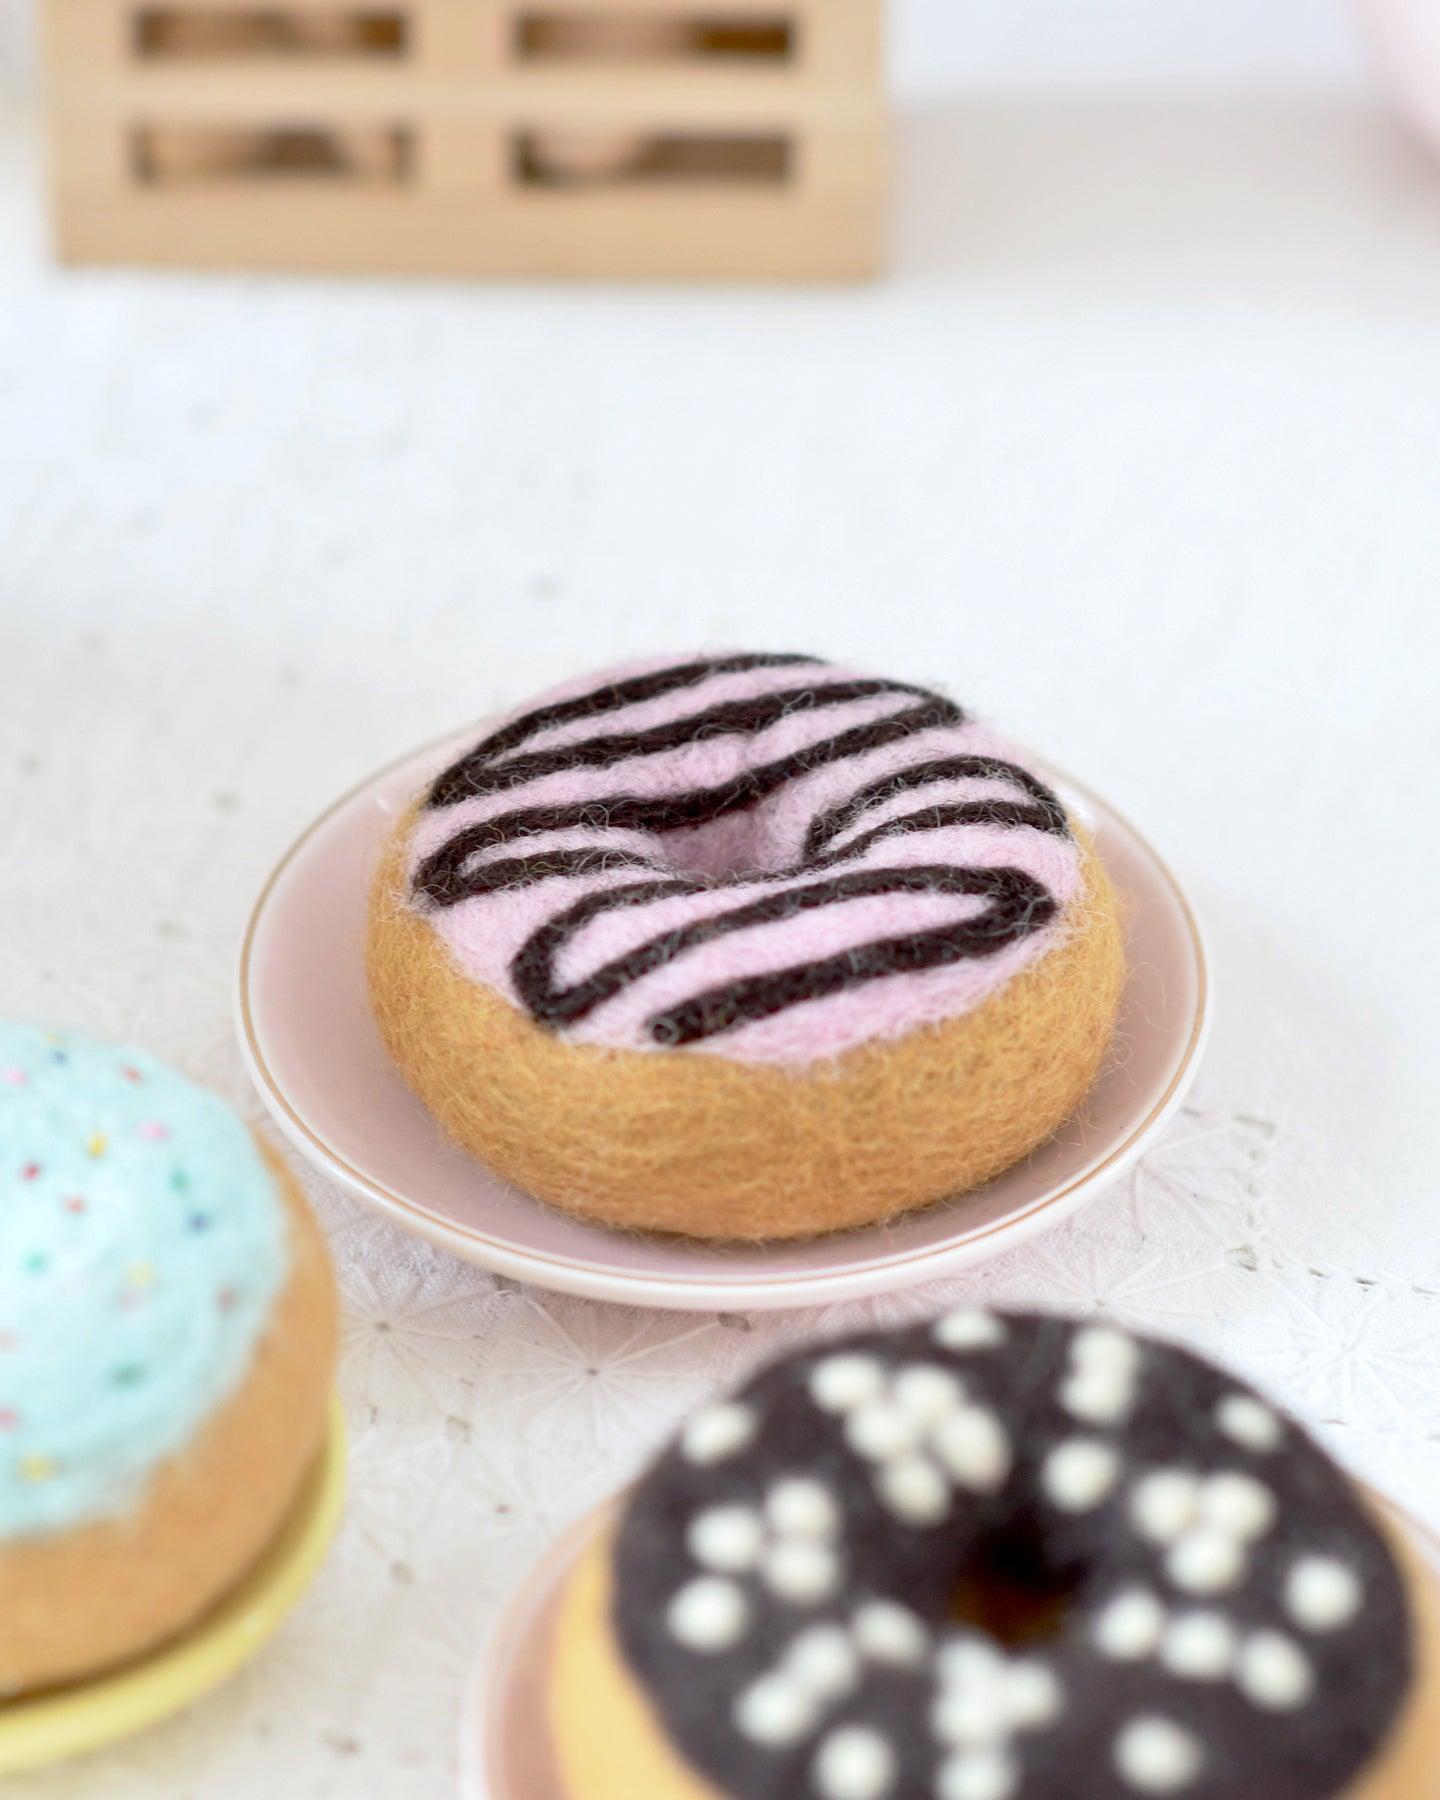 Felt Doughnut (Donut) with Pink Vanilla Frosting and Chocolate Drizzle - Tara Treasures